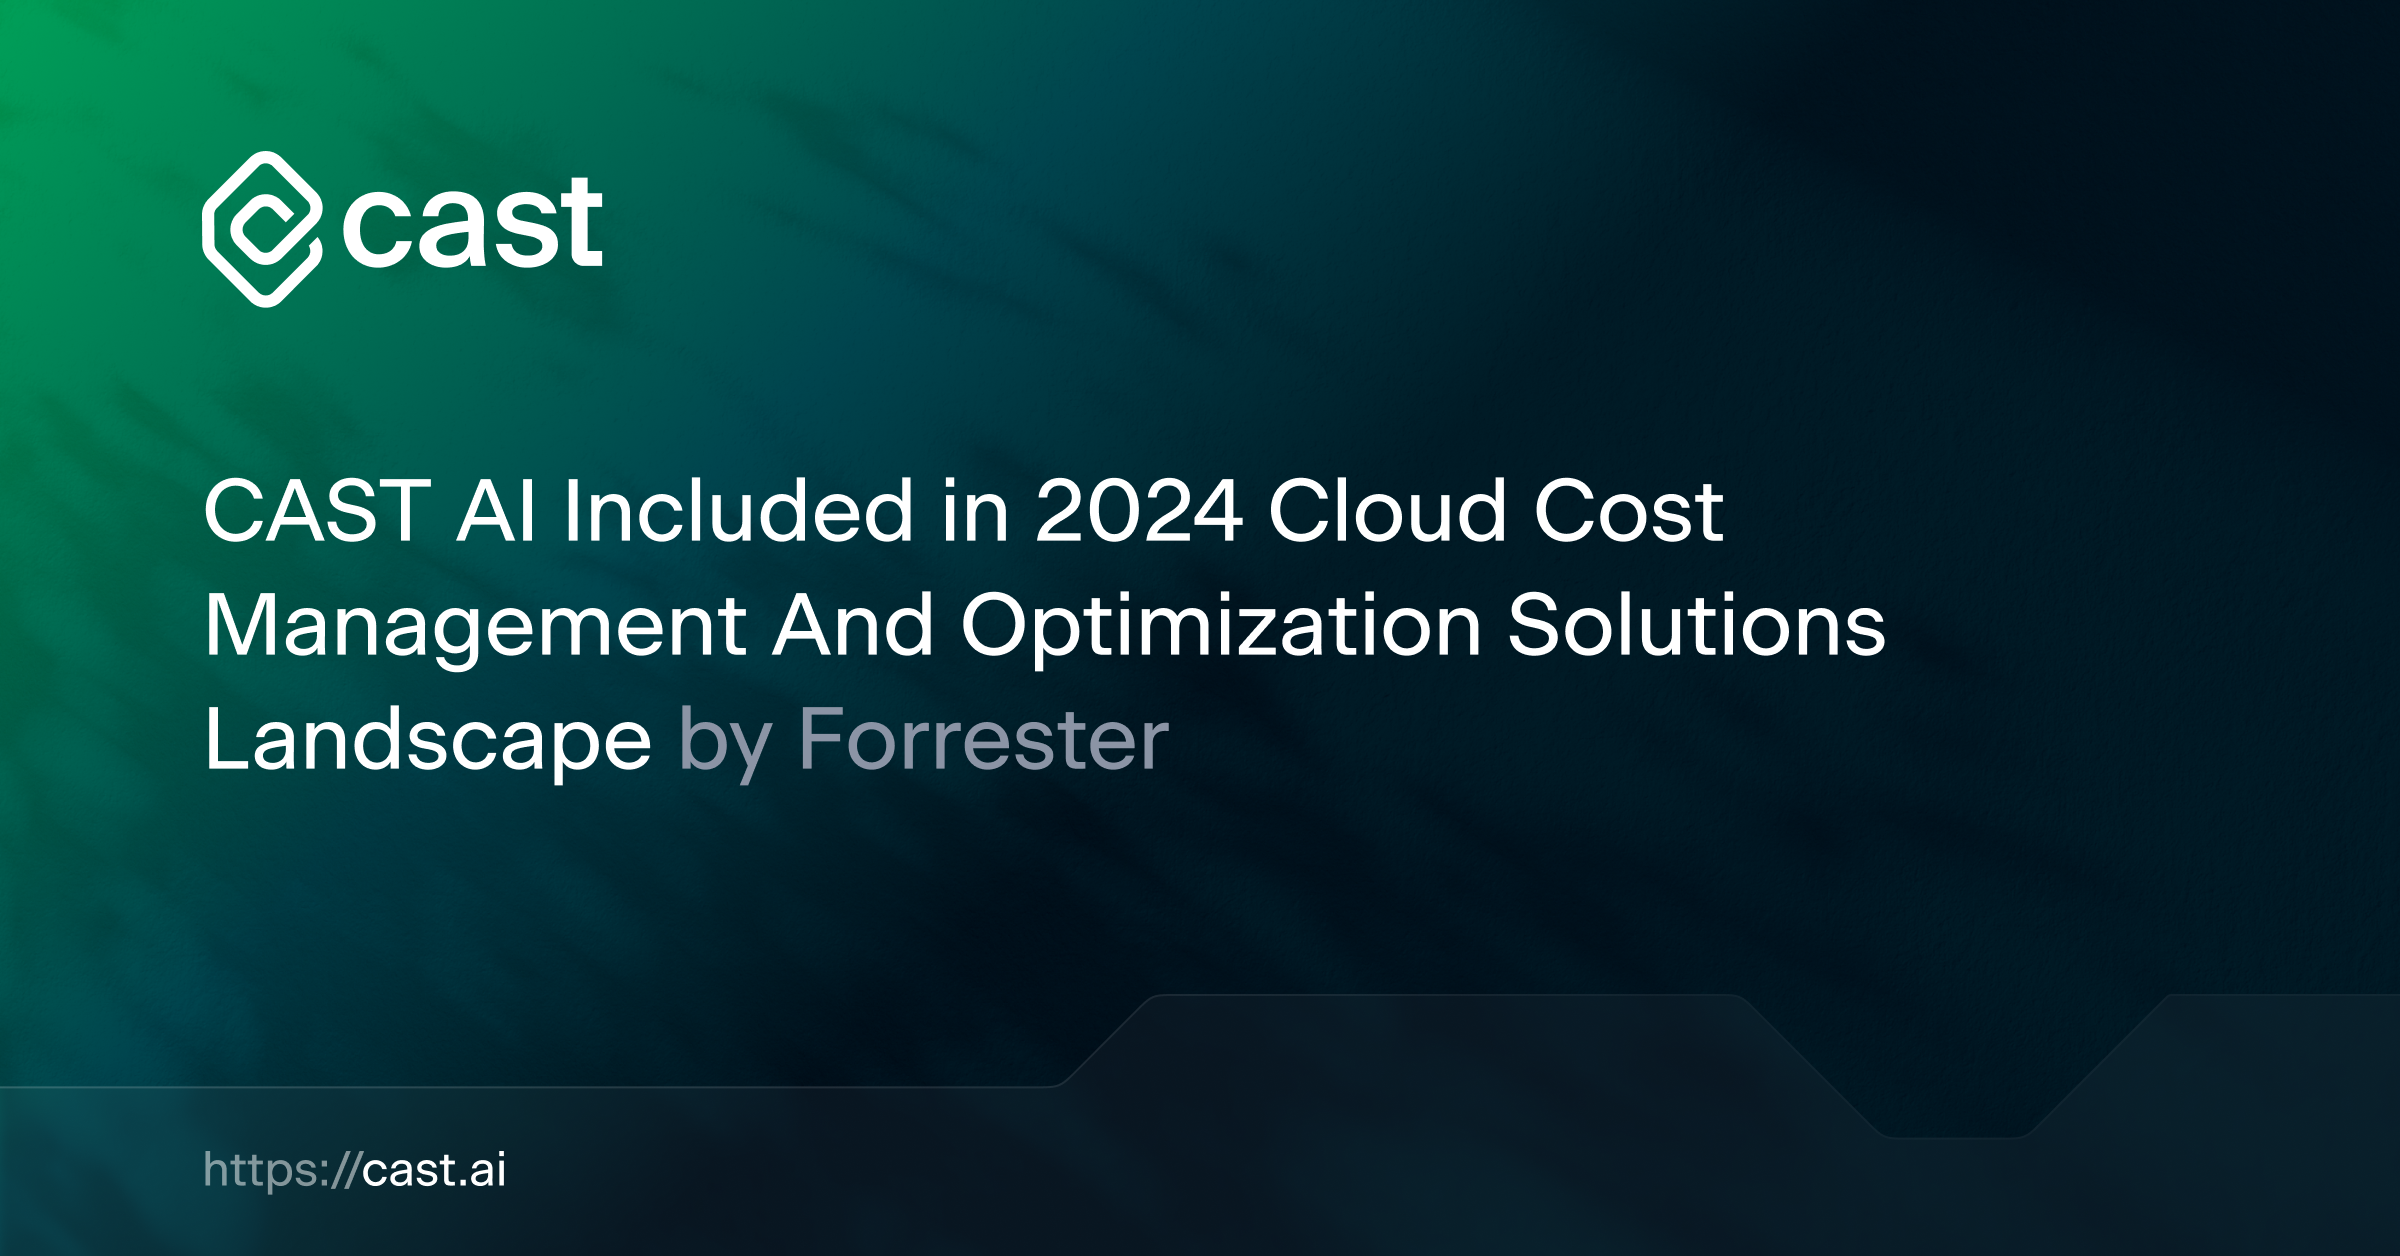 CAST AI Included in 2024 Cloud Cost Management And Optimization Solutions Landscape by Independent Research Firm